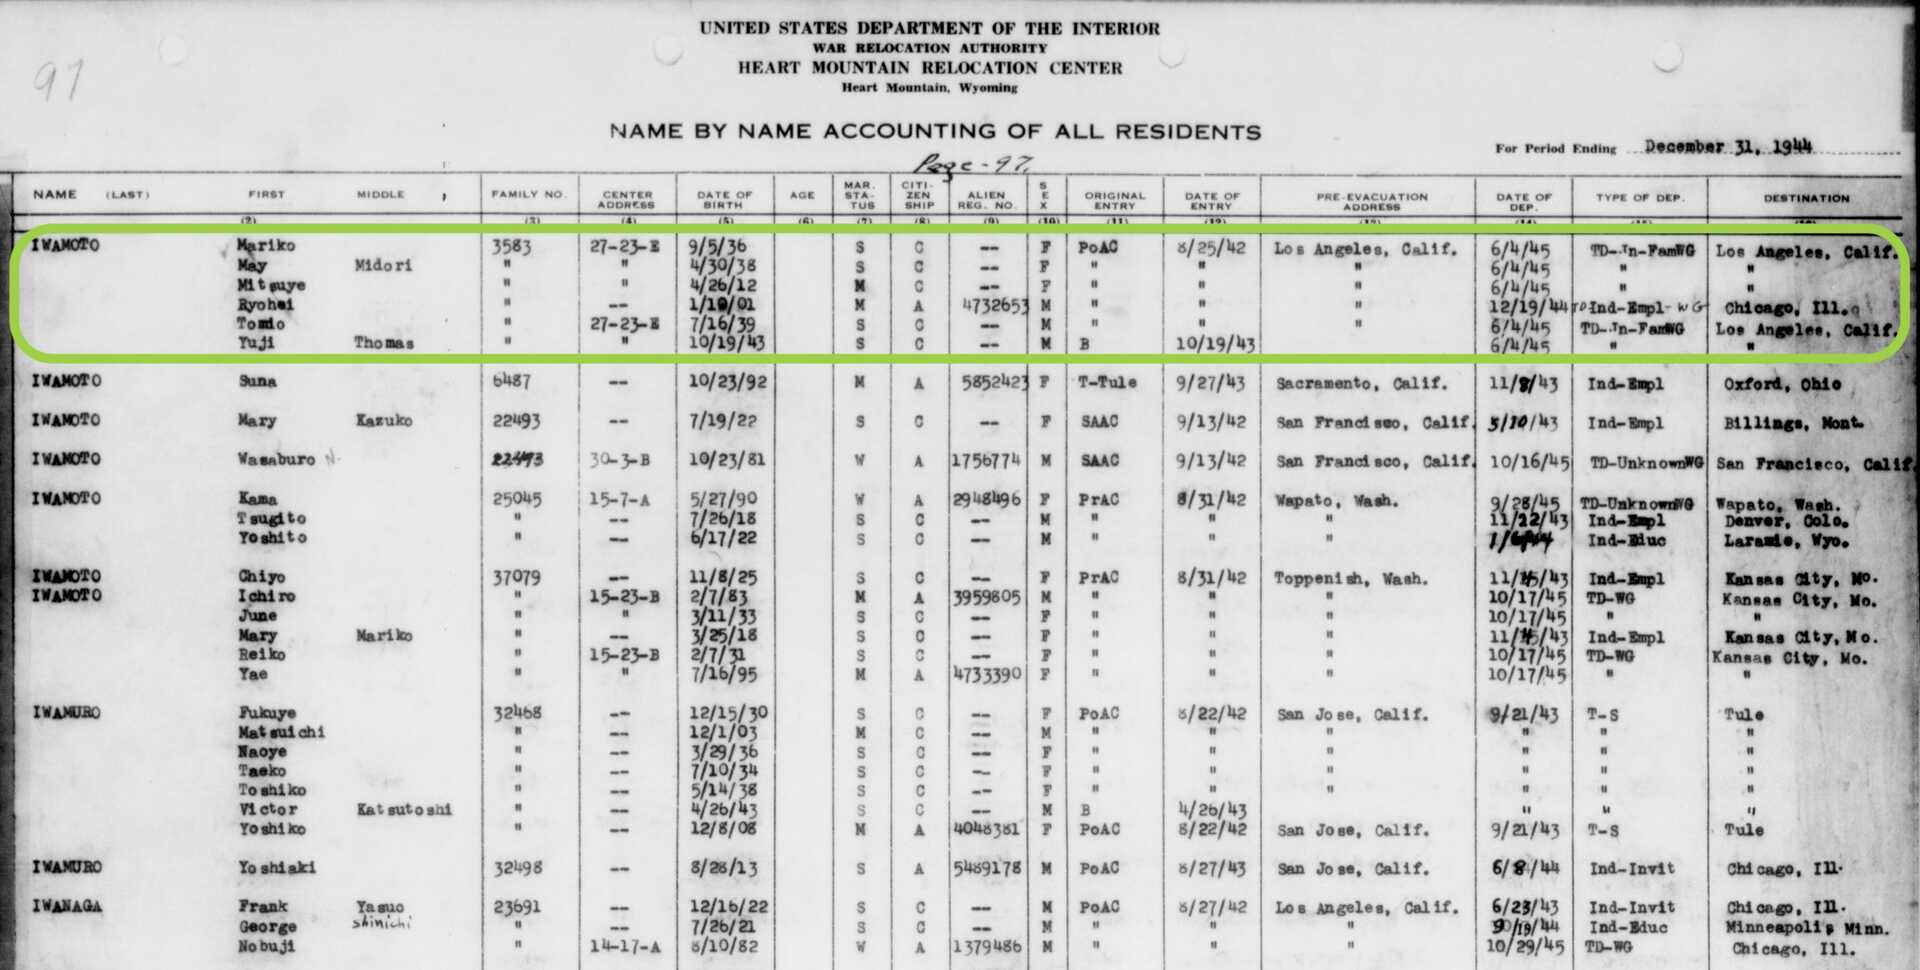 A 1944 roster of incarcerated inmates at Heart Mountain Relocation Center. Tomio Iwamoto's family circled in green. 